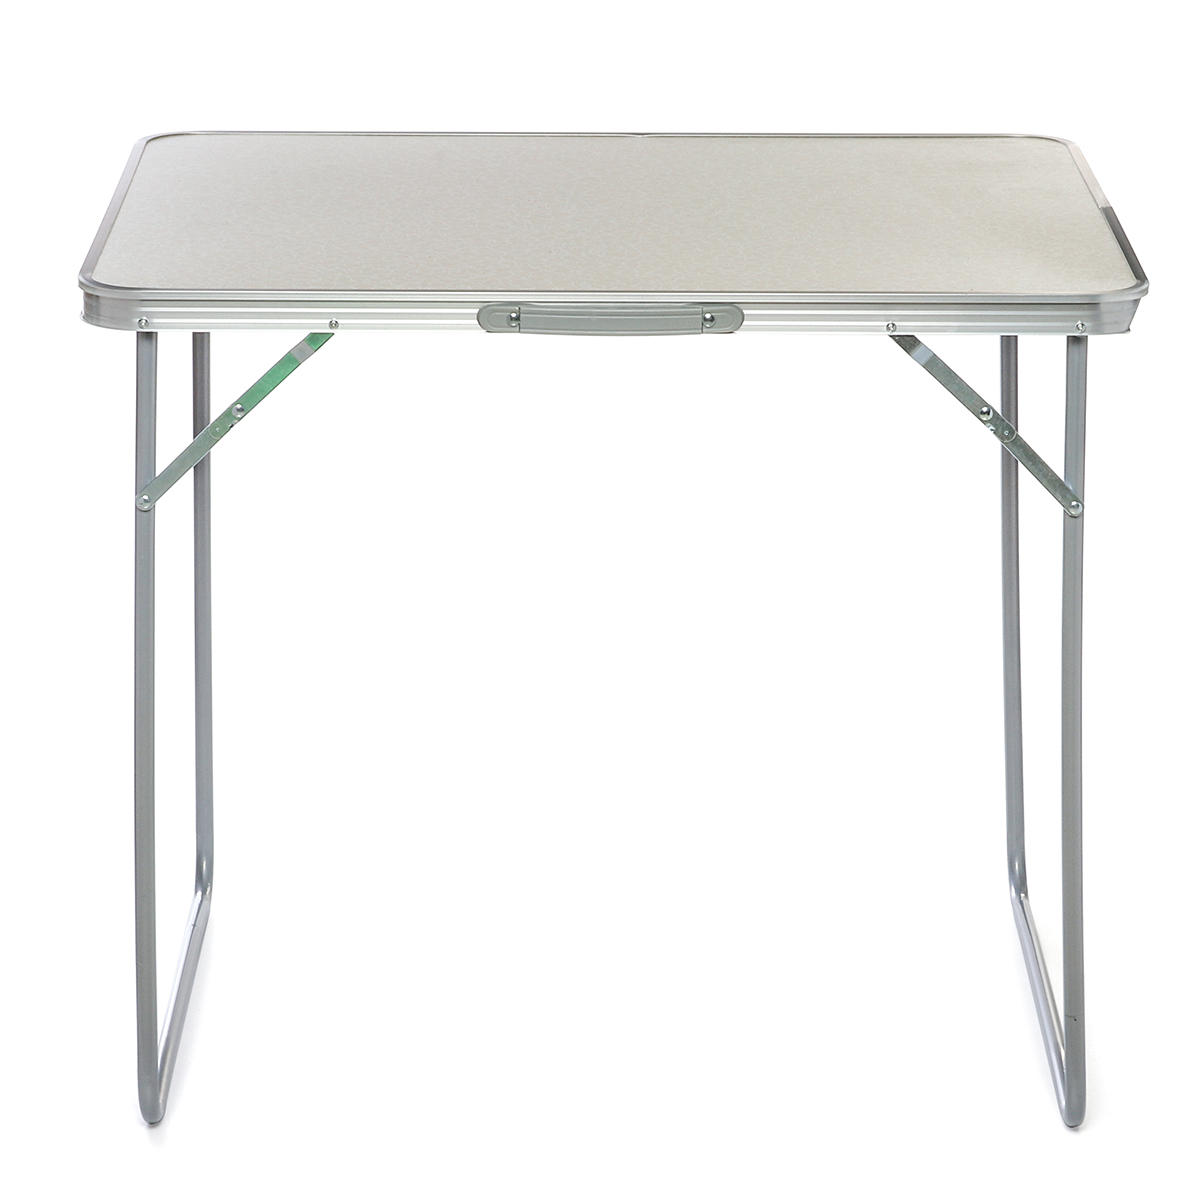 Portable Folding Table Laptop Desk Study Table Aluminum Camping Table with Carrying Handle and  Foldable Legs Table for Picnic Beach Outdoors